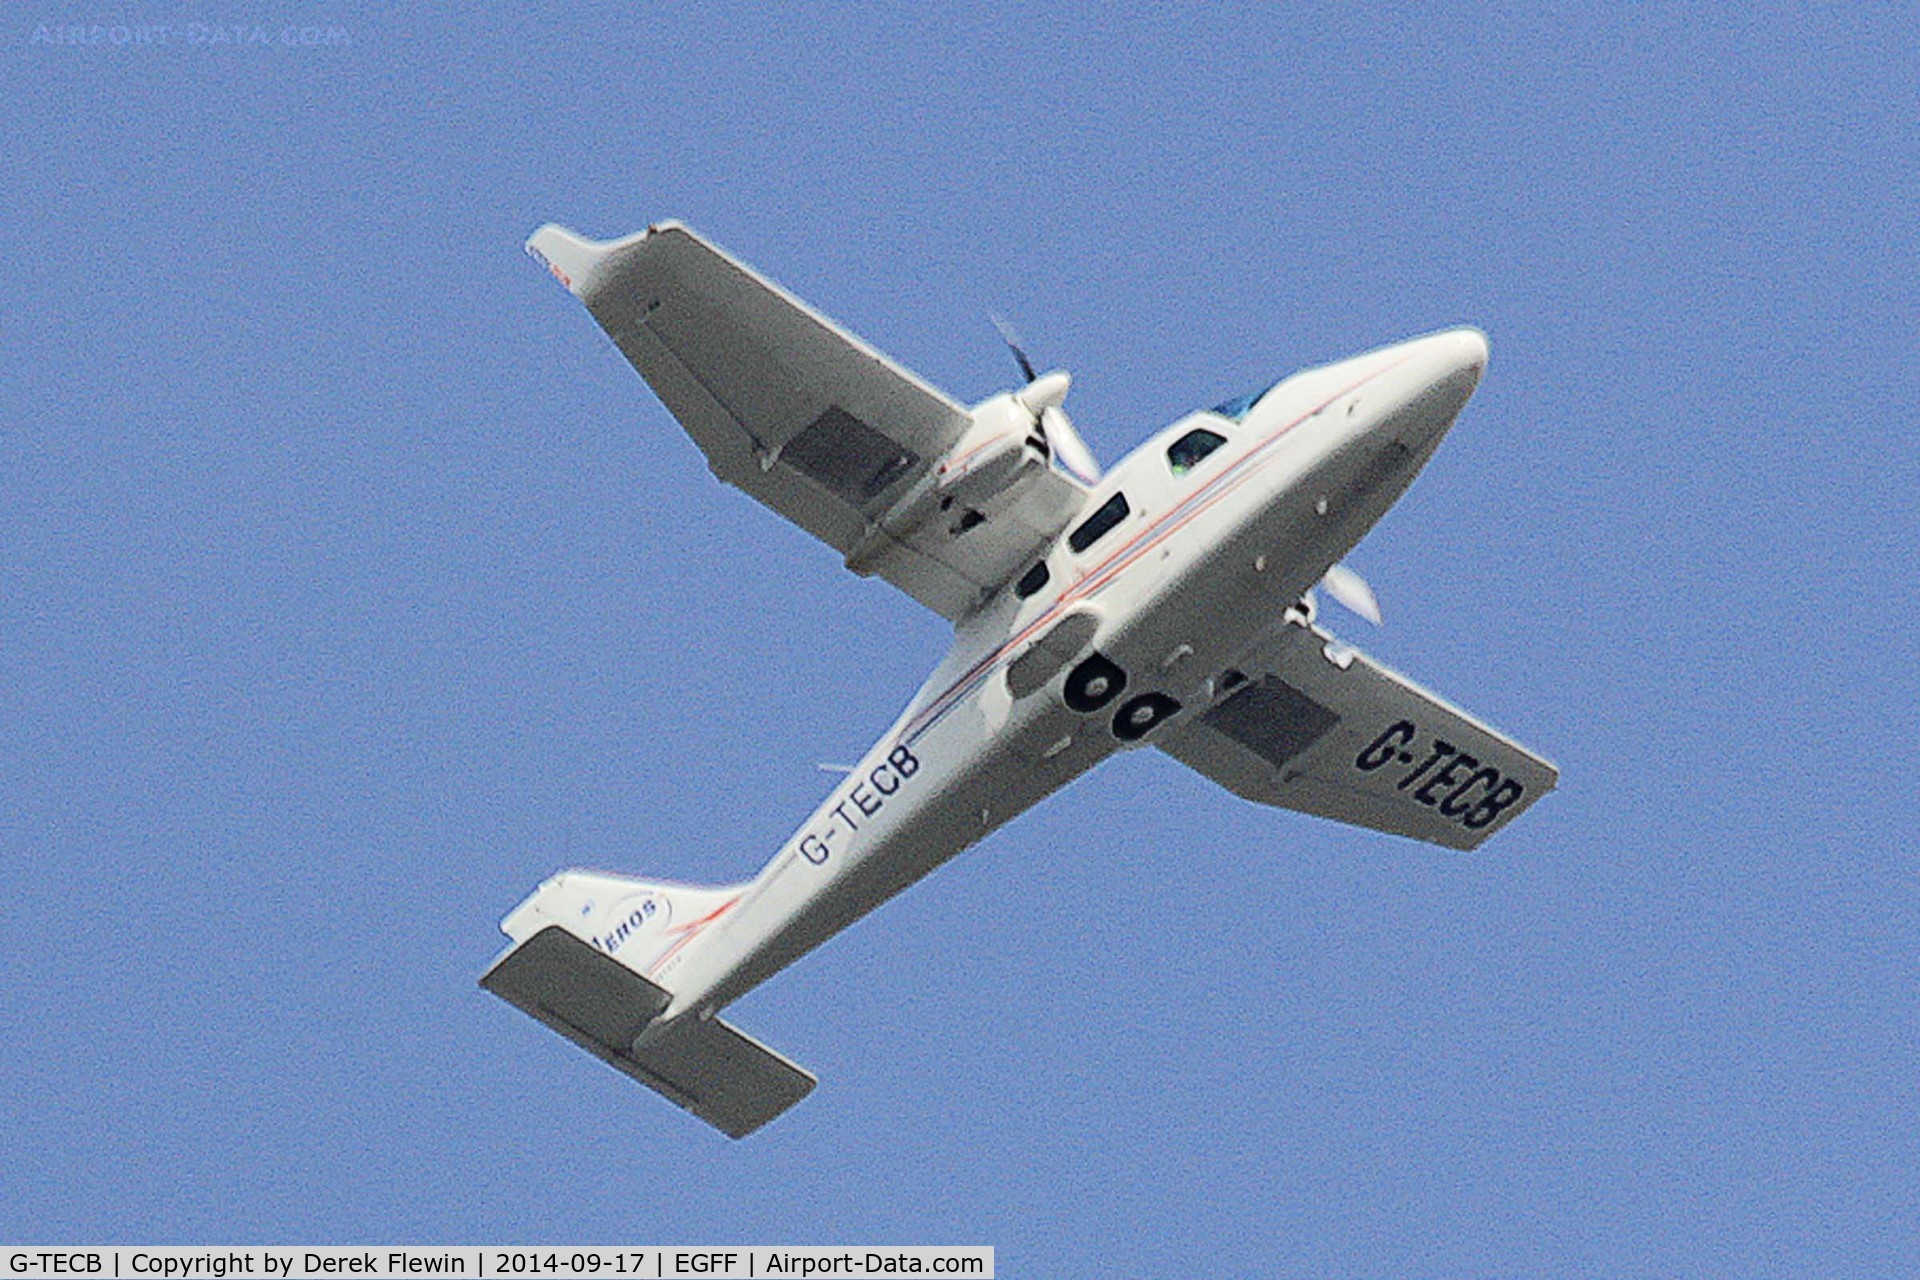 G-TECB, 2013 Tecnam P-2006T C/N 122, P-2006T,Staverton based,  call sign Exam 12, seen in the overhead at EGFF, following an ILS approach practice, en-route Gloucester.